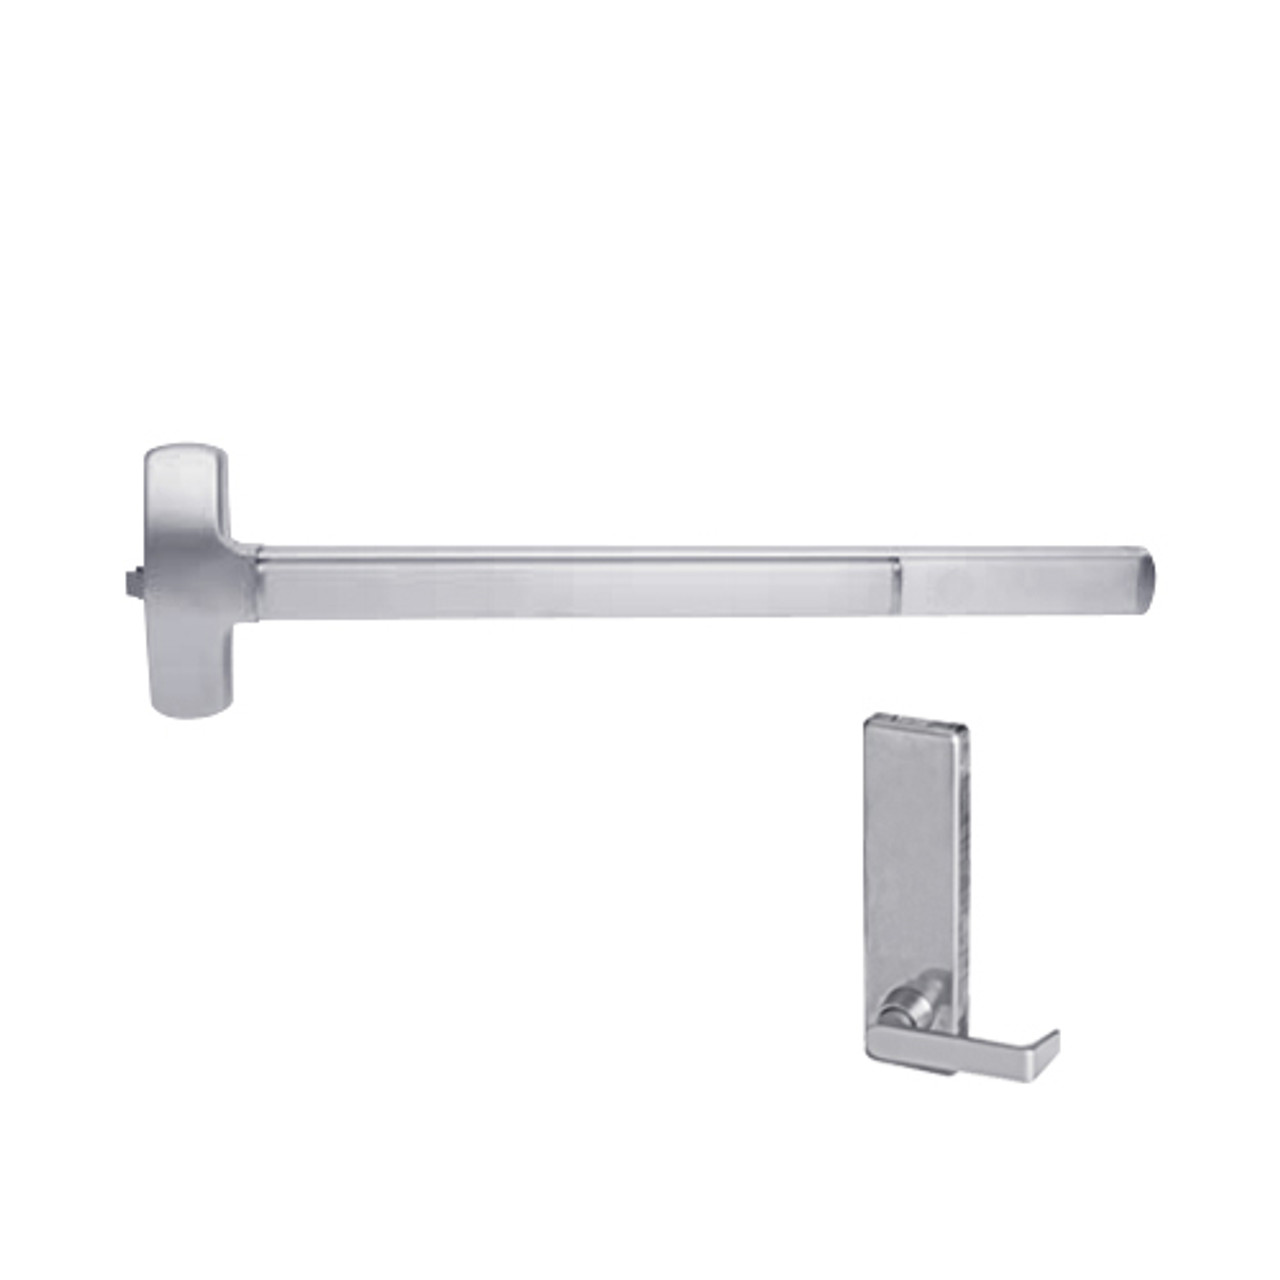 F-25-R-L-BE-DANE-US32-4-LHR Falcon Exit Device in Polished Stainless Steel